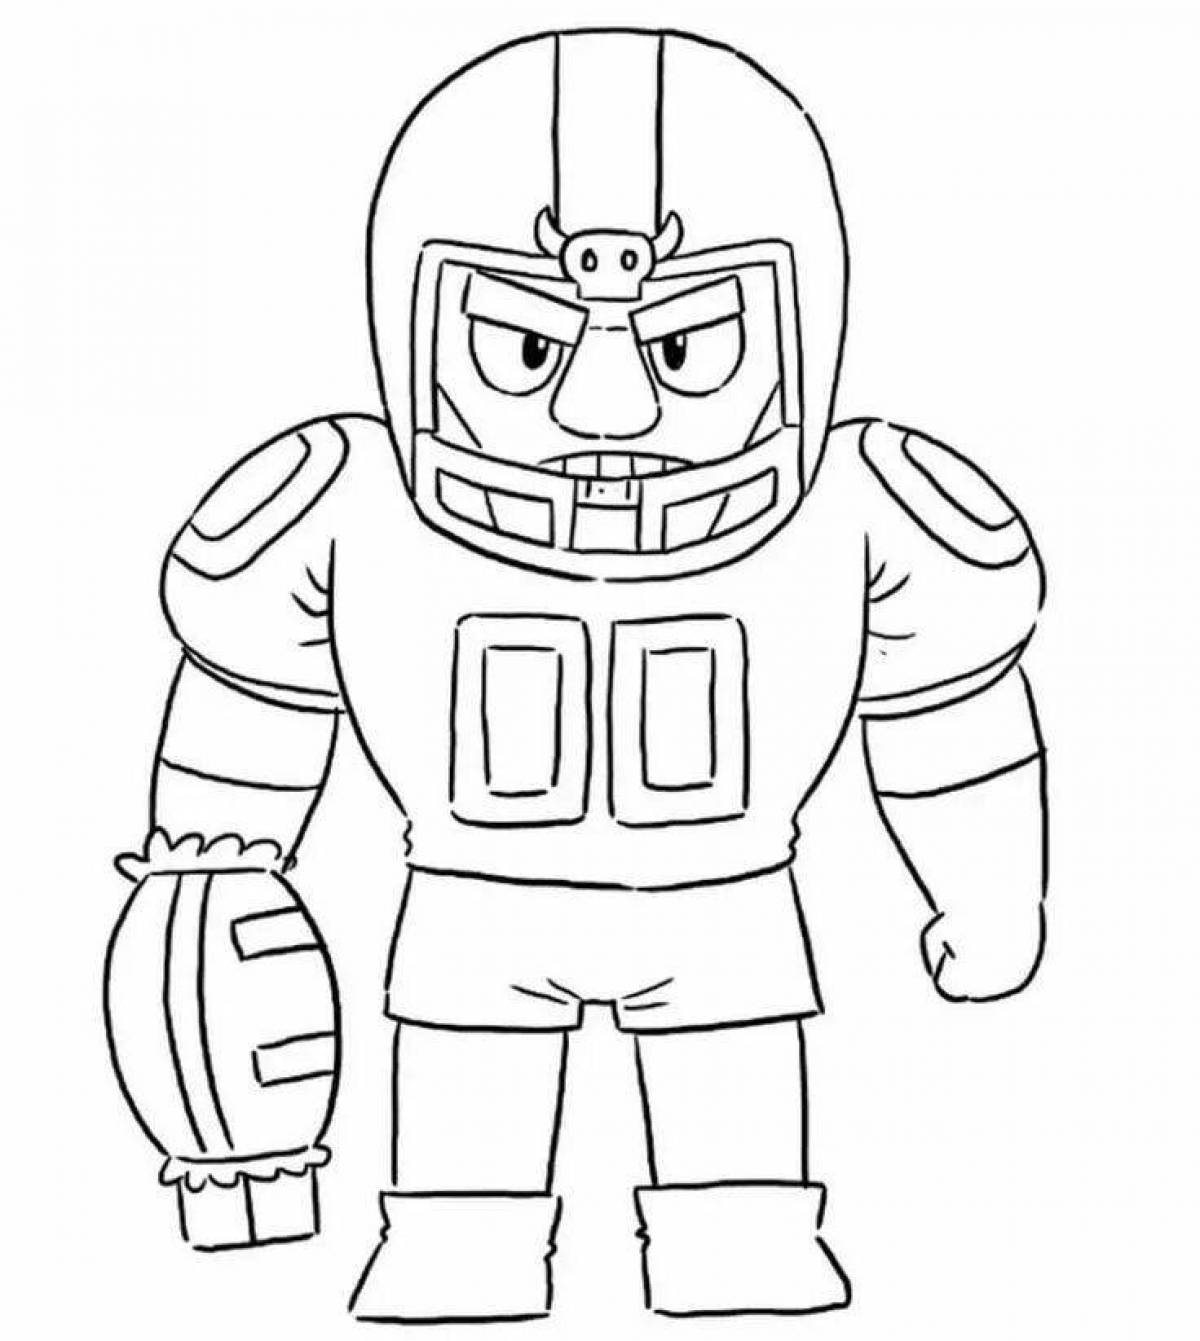 Animated bull coloring page